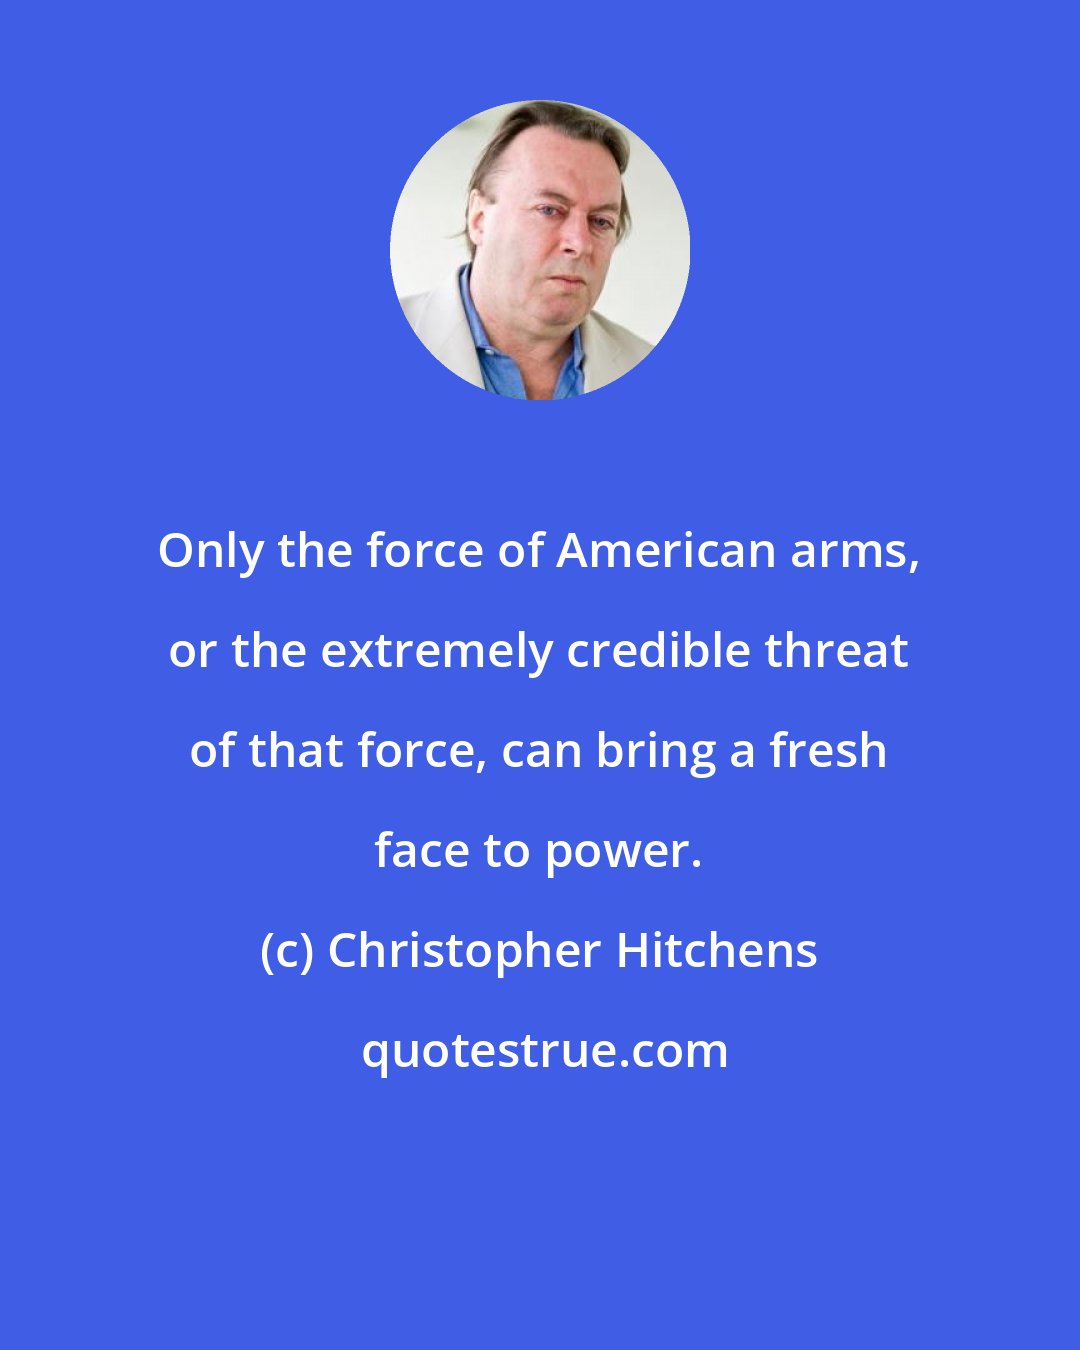 Christopher Hitchens: Only the force of American arms, or the extremely credible threat of that force, can bring a fresh face to power.